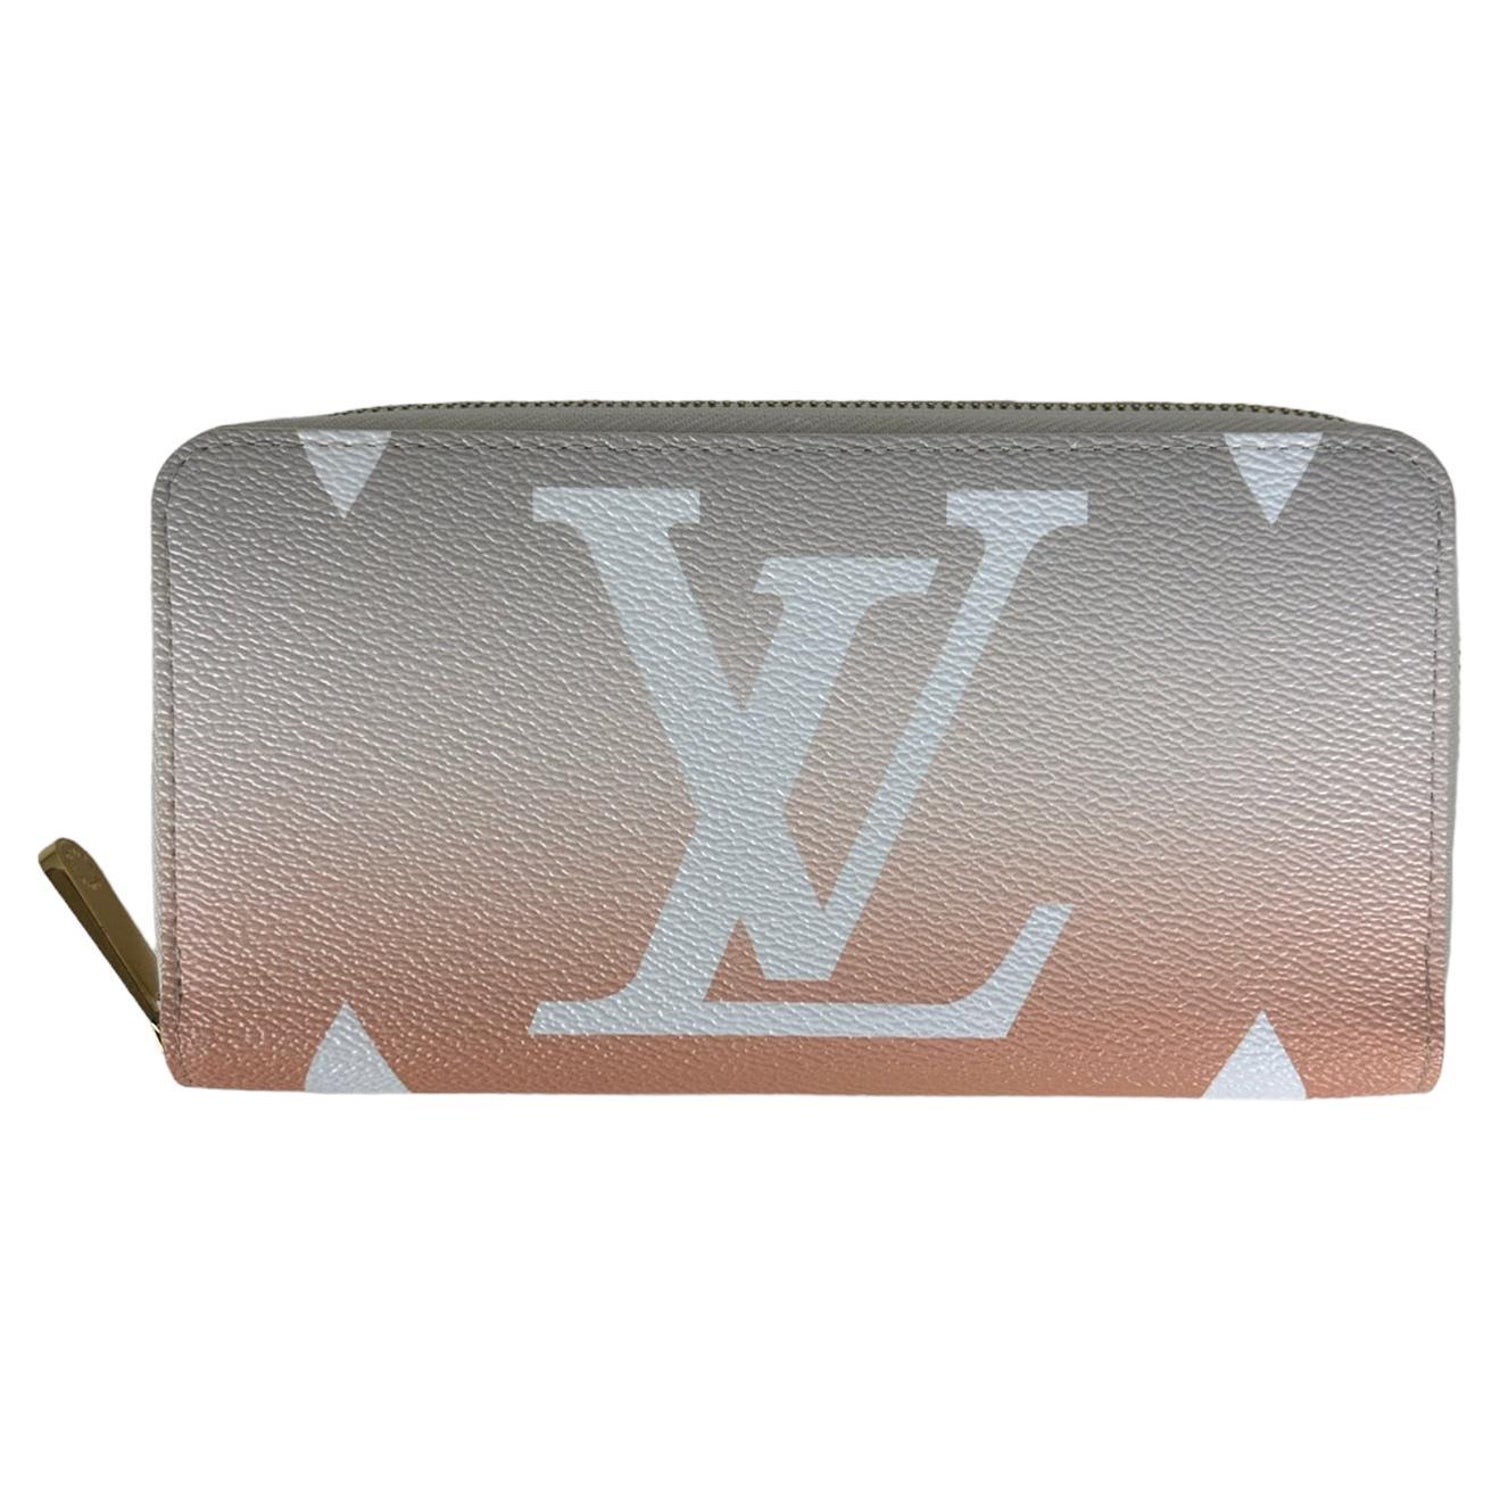 New Louis Vuitton by The Pool Kirigami Pouch Brume PM Card Case